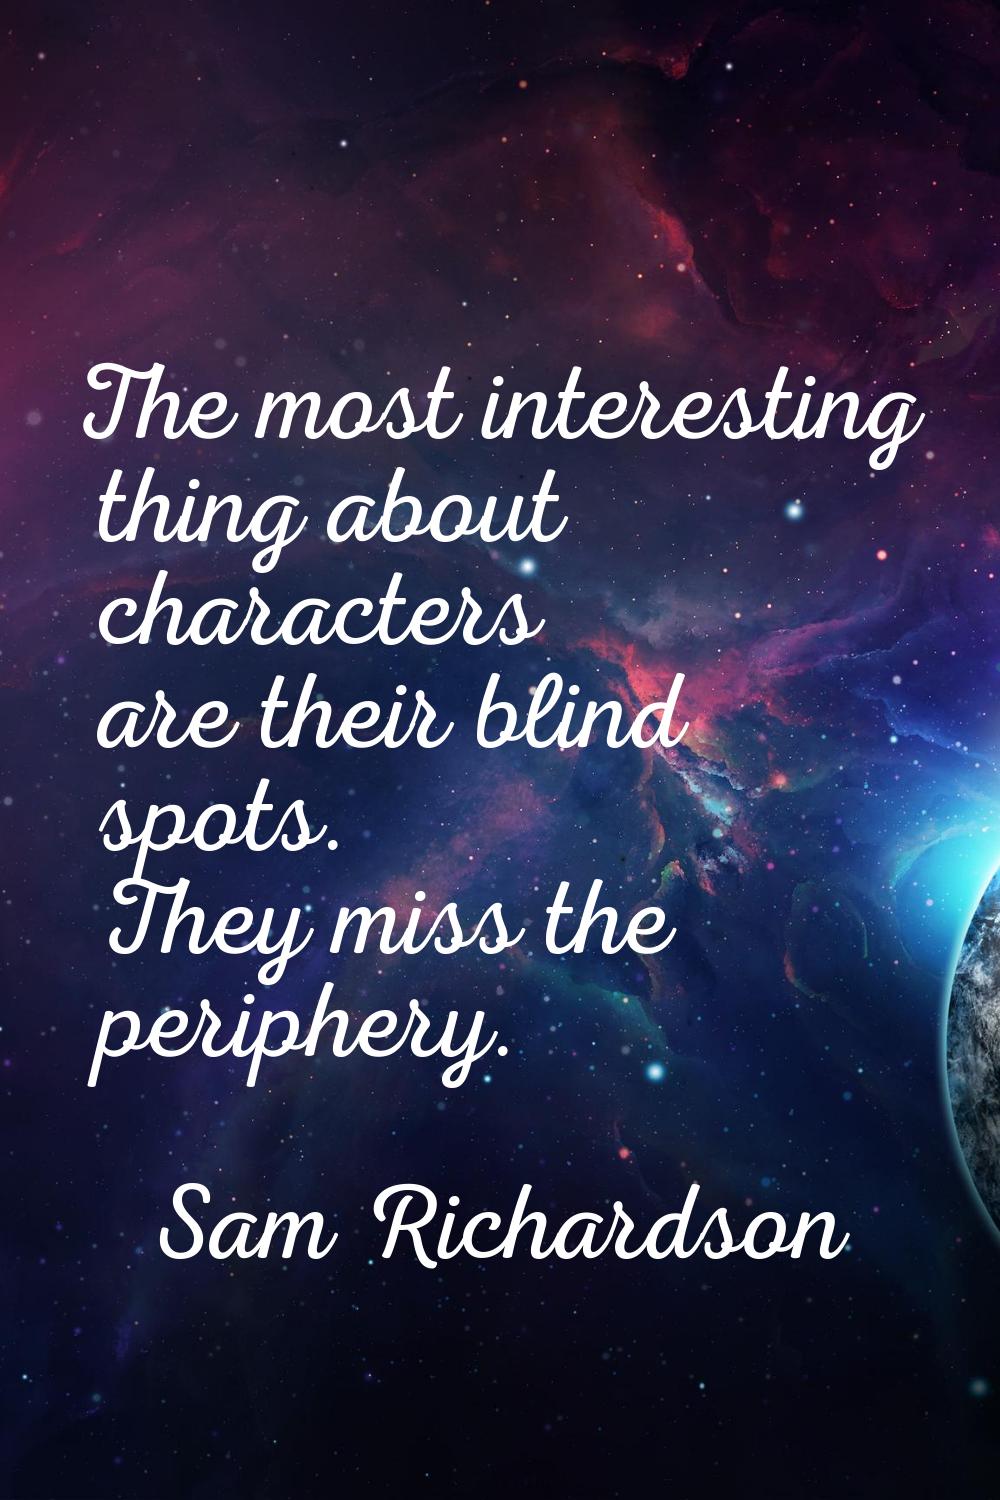 The most interesting thing about characters are their blind spots. They miss the periphery.